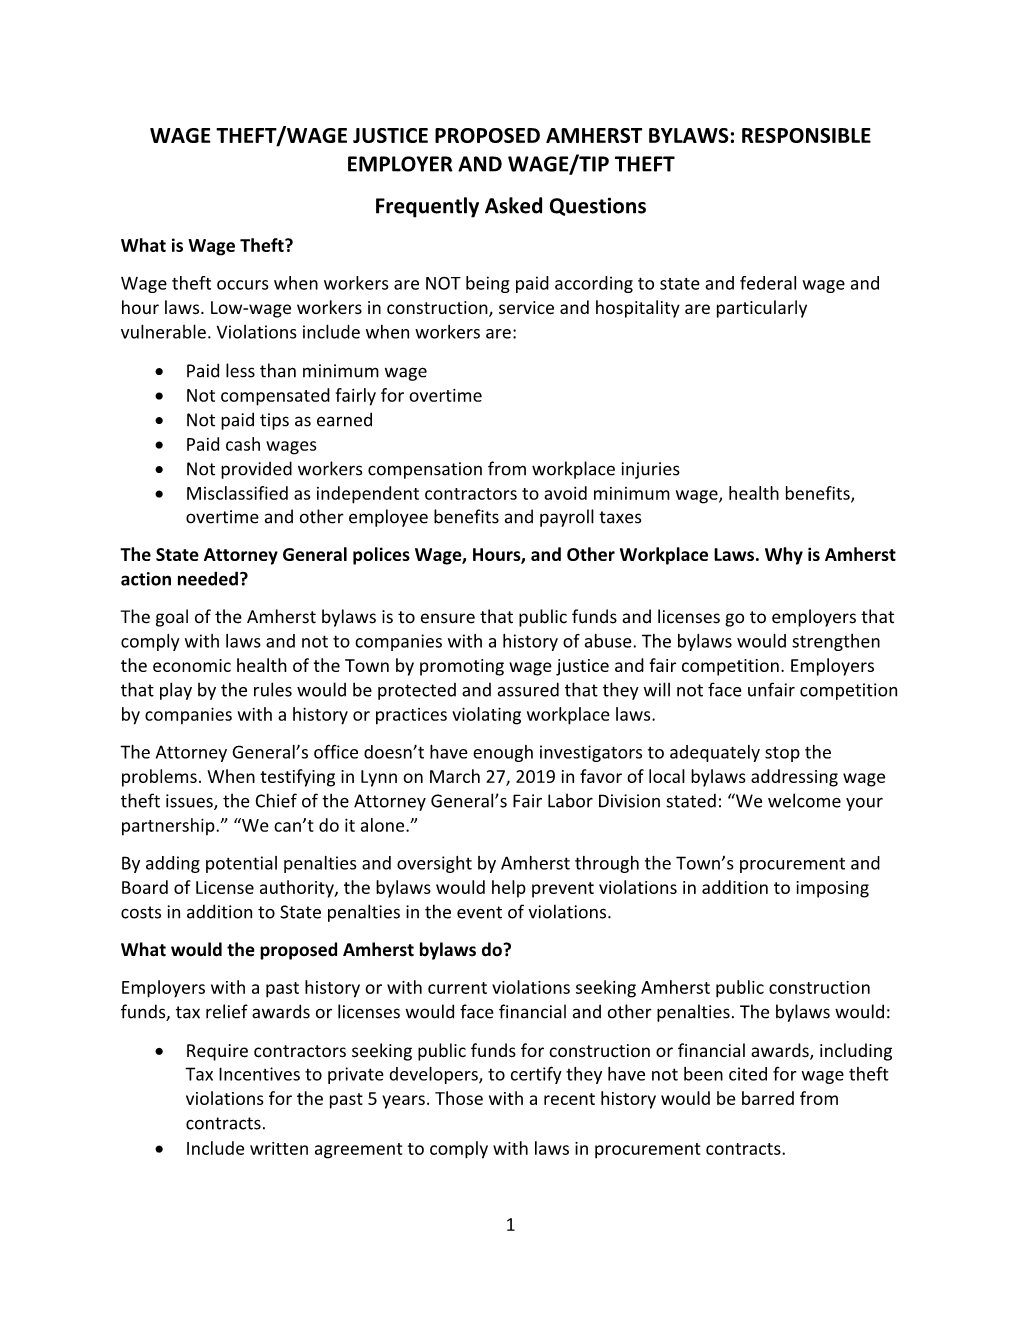 WAGE THEFT/WAGE JUSTICE PROPOSED AMHERST BYLAWS: RESPONSIBLE EMPLOYER and WAGE/TIP THEFT Frequently Asked Questions